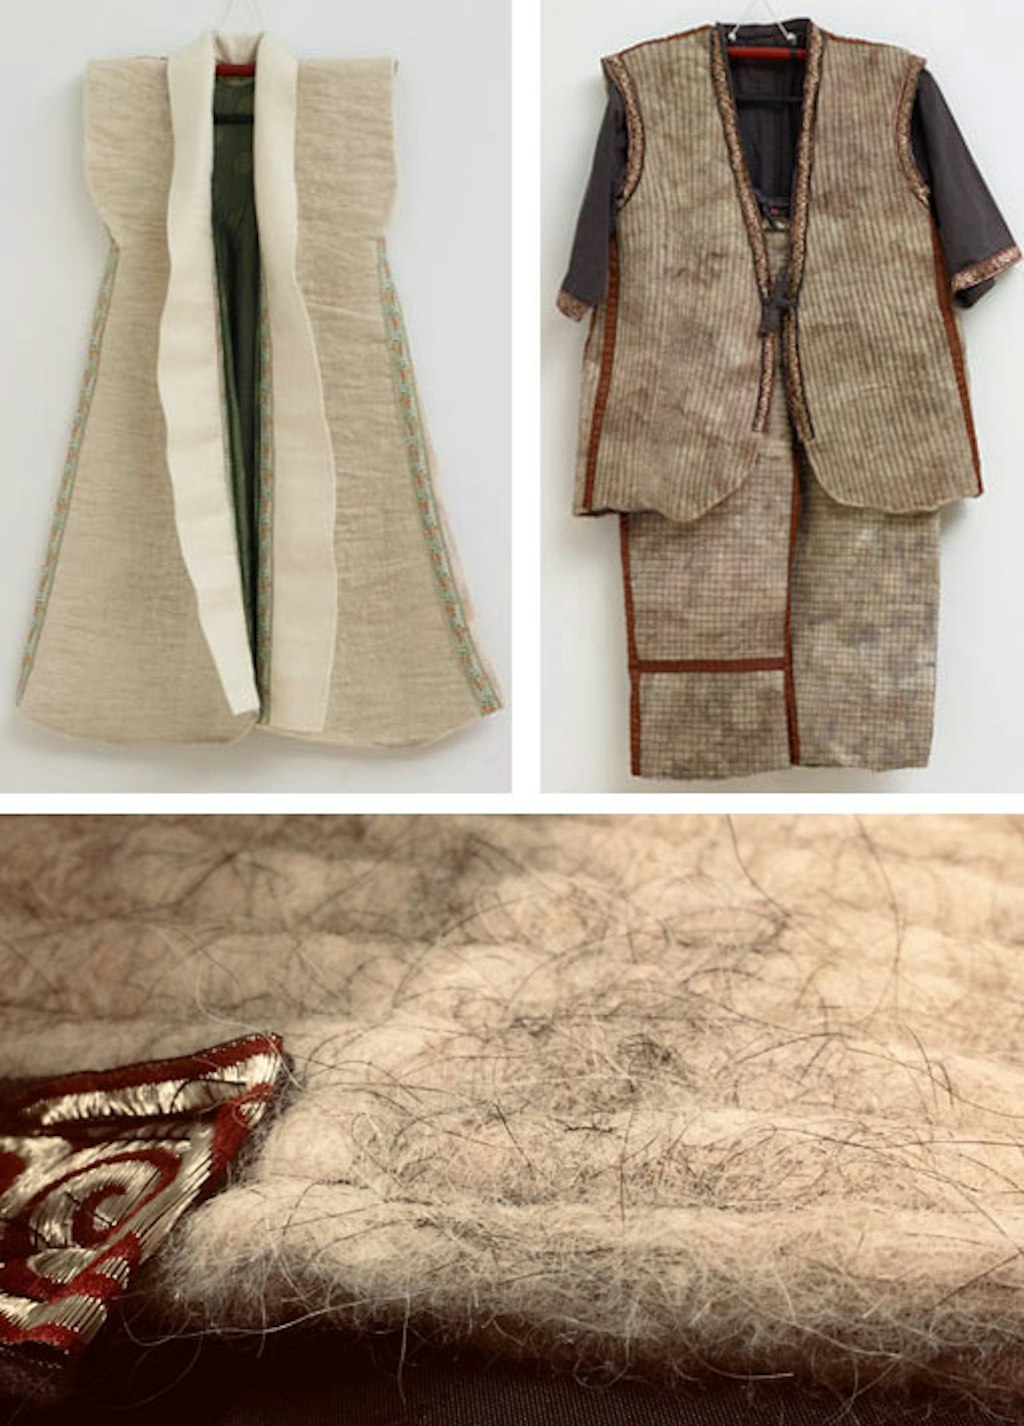 Clockwise from top left: Garments from ??Julie and Cloud?? and ??Joni and Bacon??; a close up view of the tunic from ??Joni and Bacon?? showing the reinforcing machine stitching